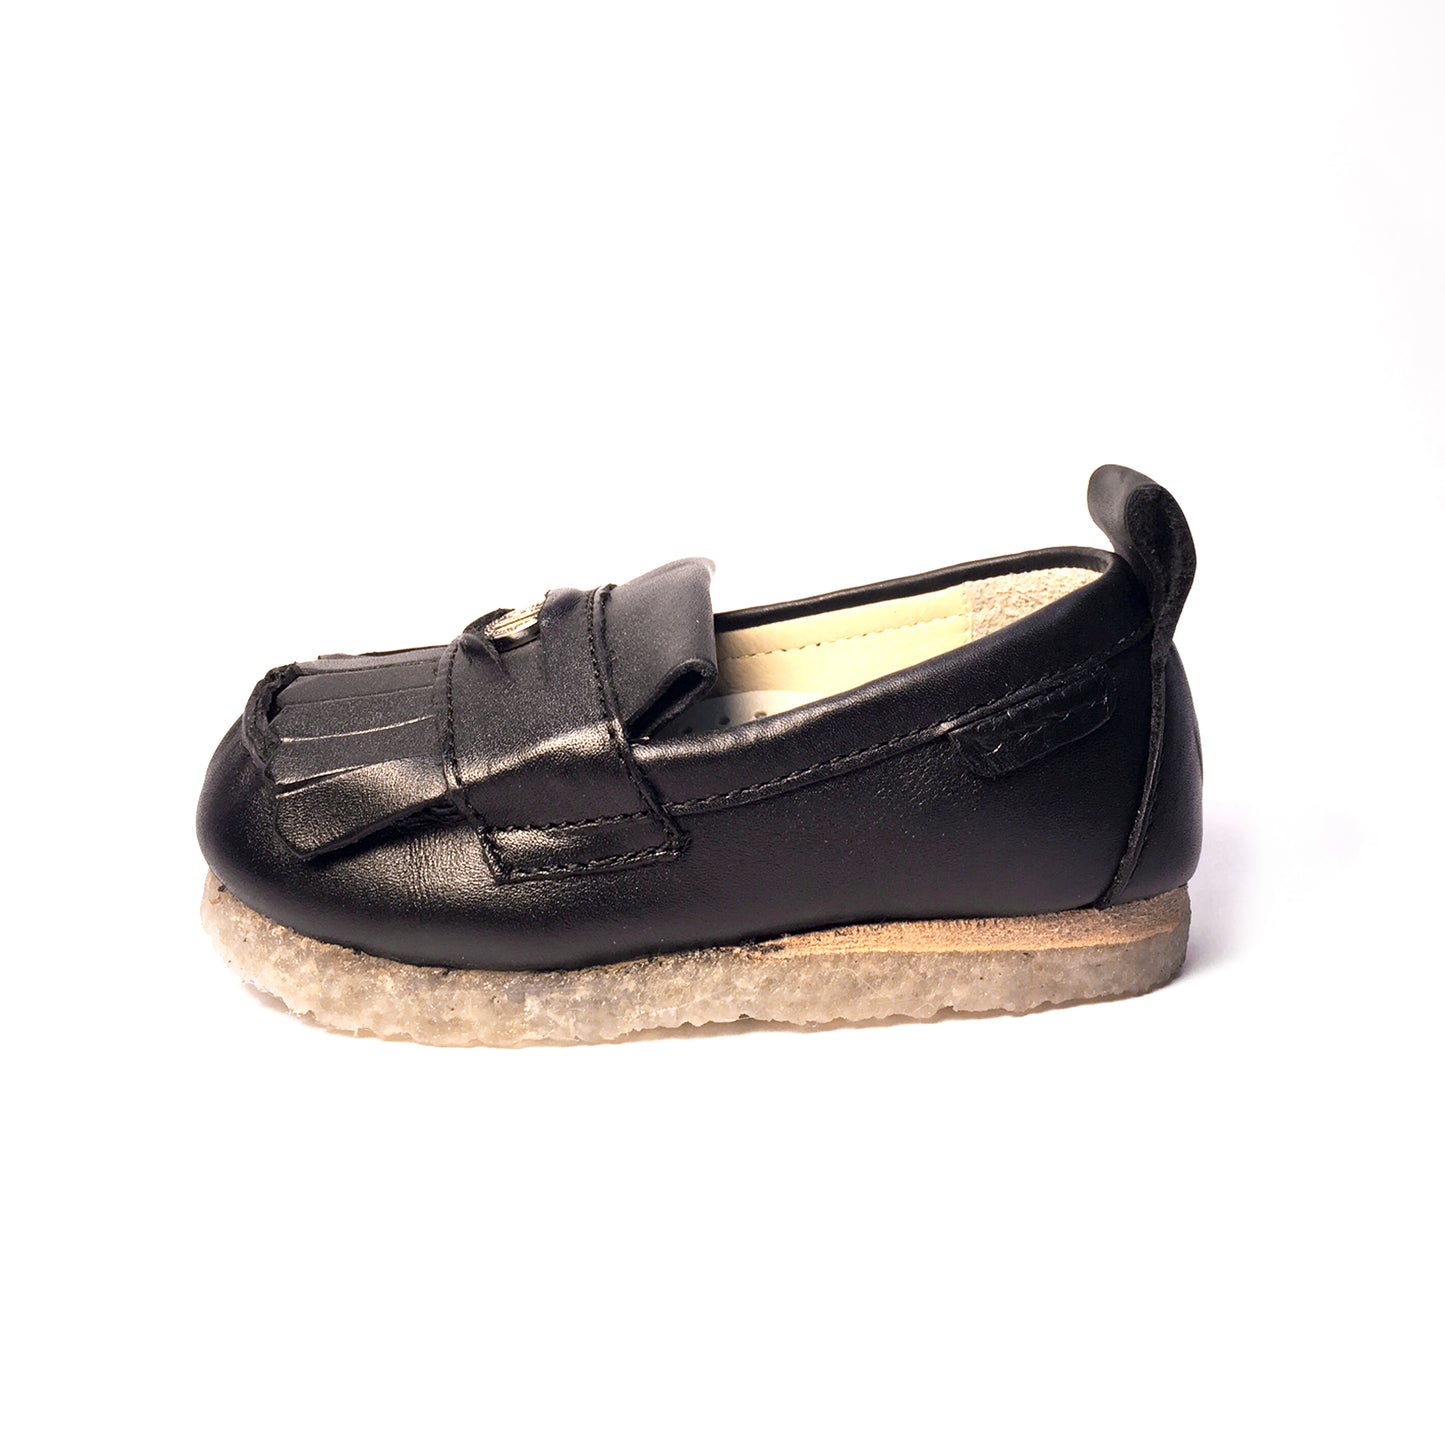 Peso Loafer Kids Shoes - Pirate